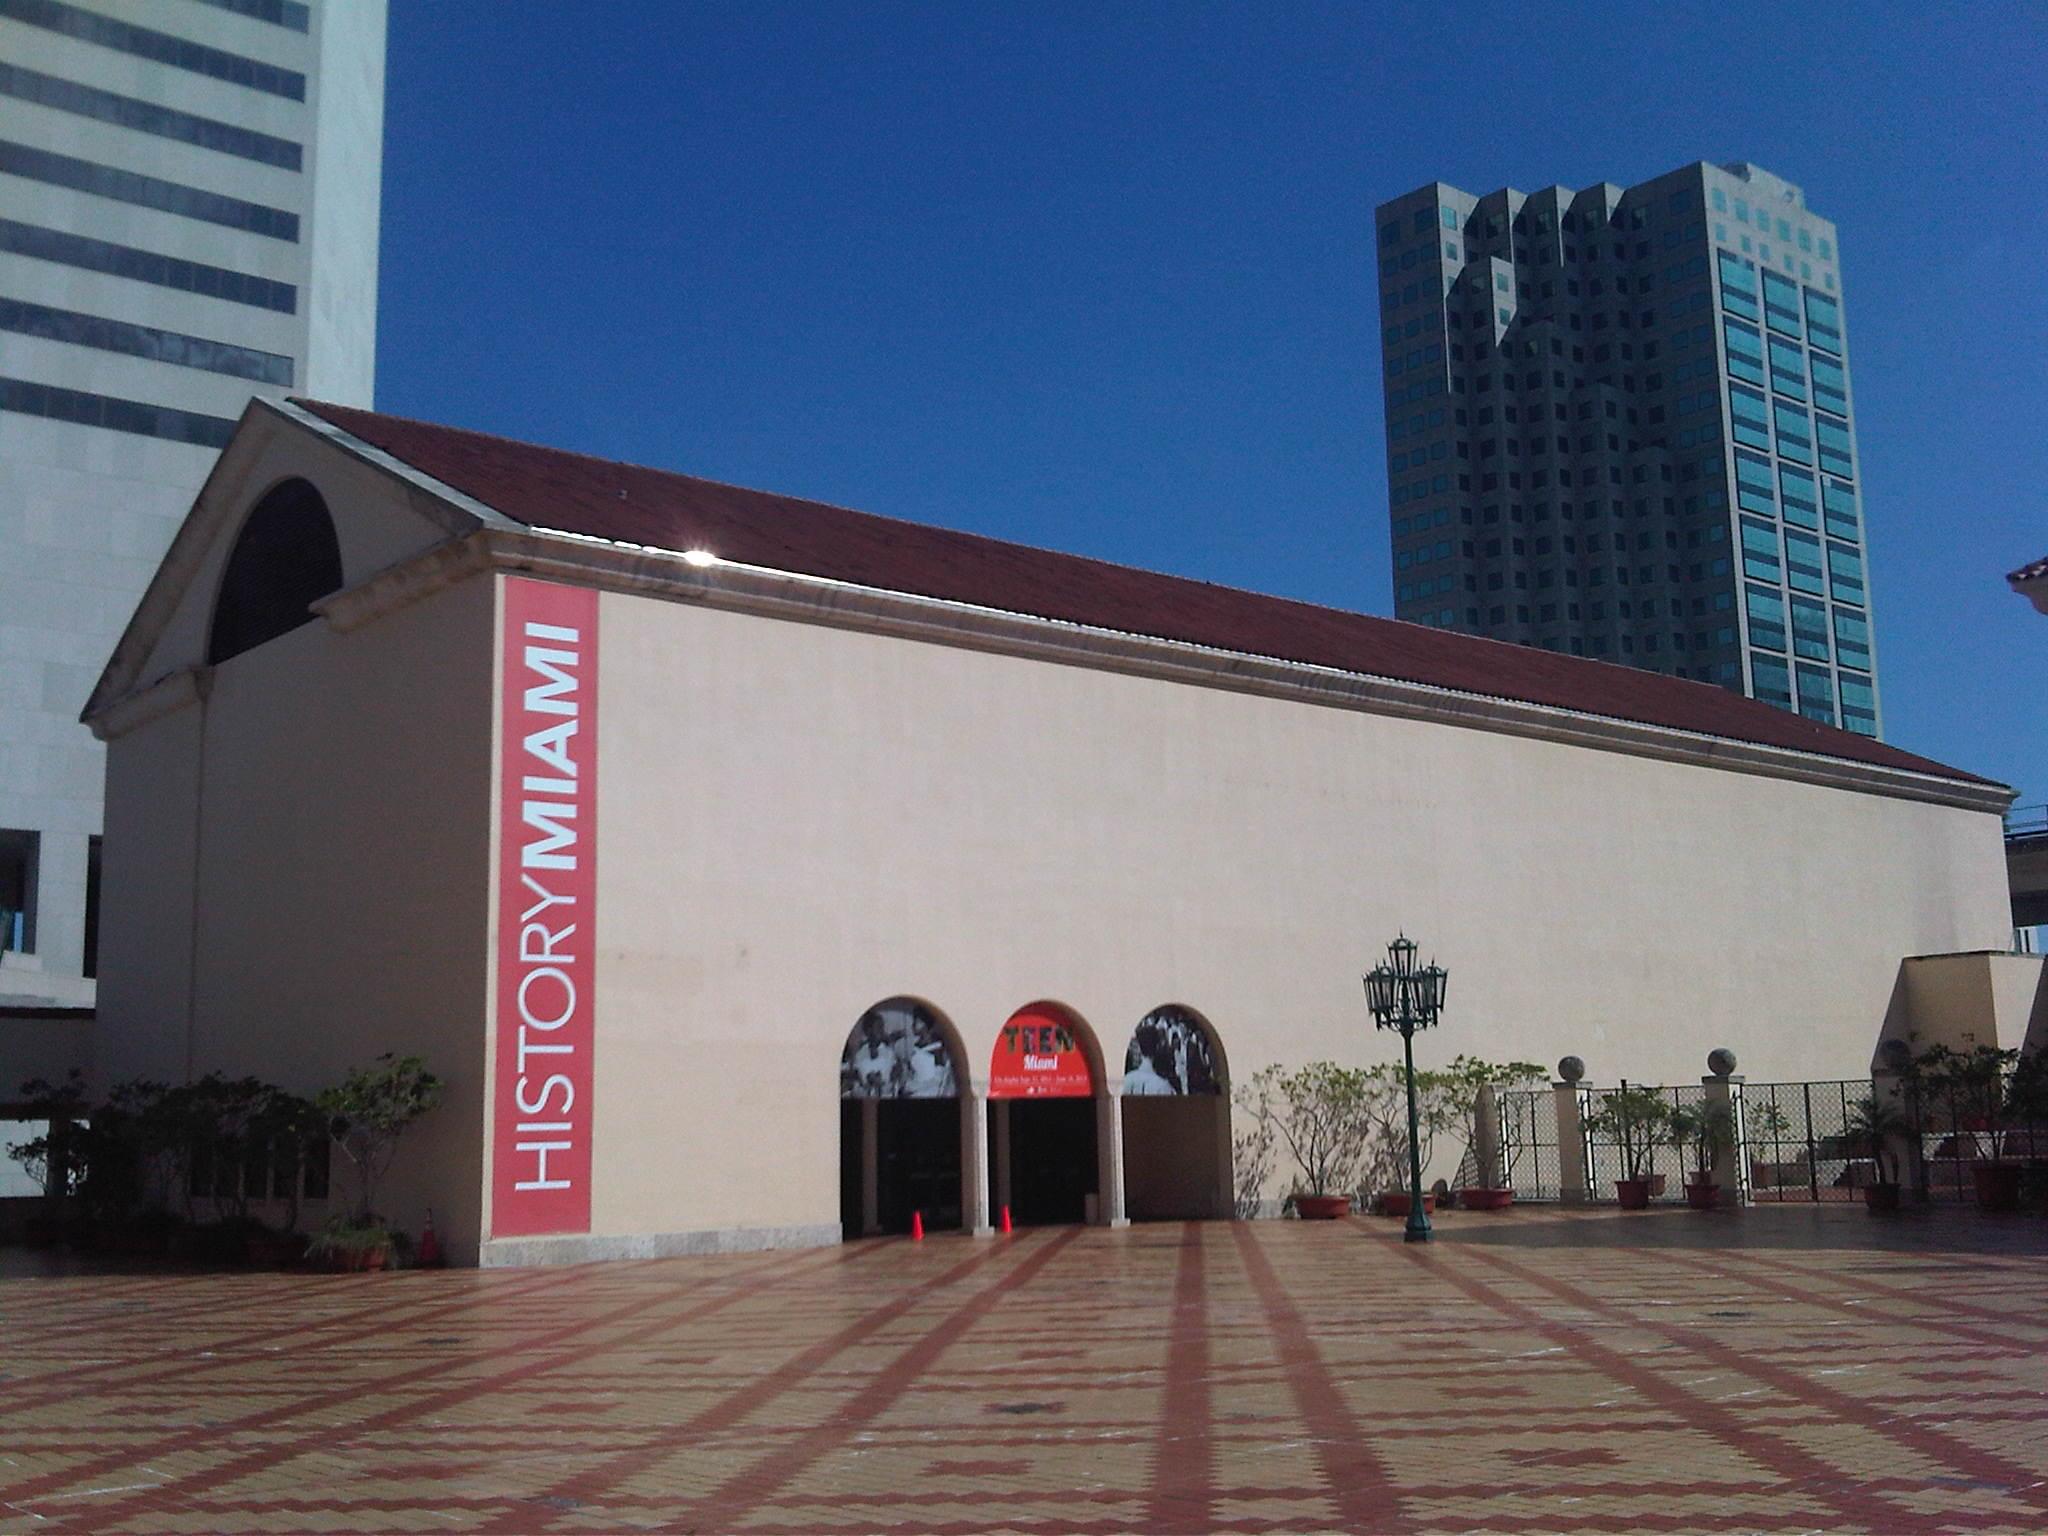 HistoryMiami Museum Overview